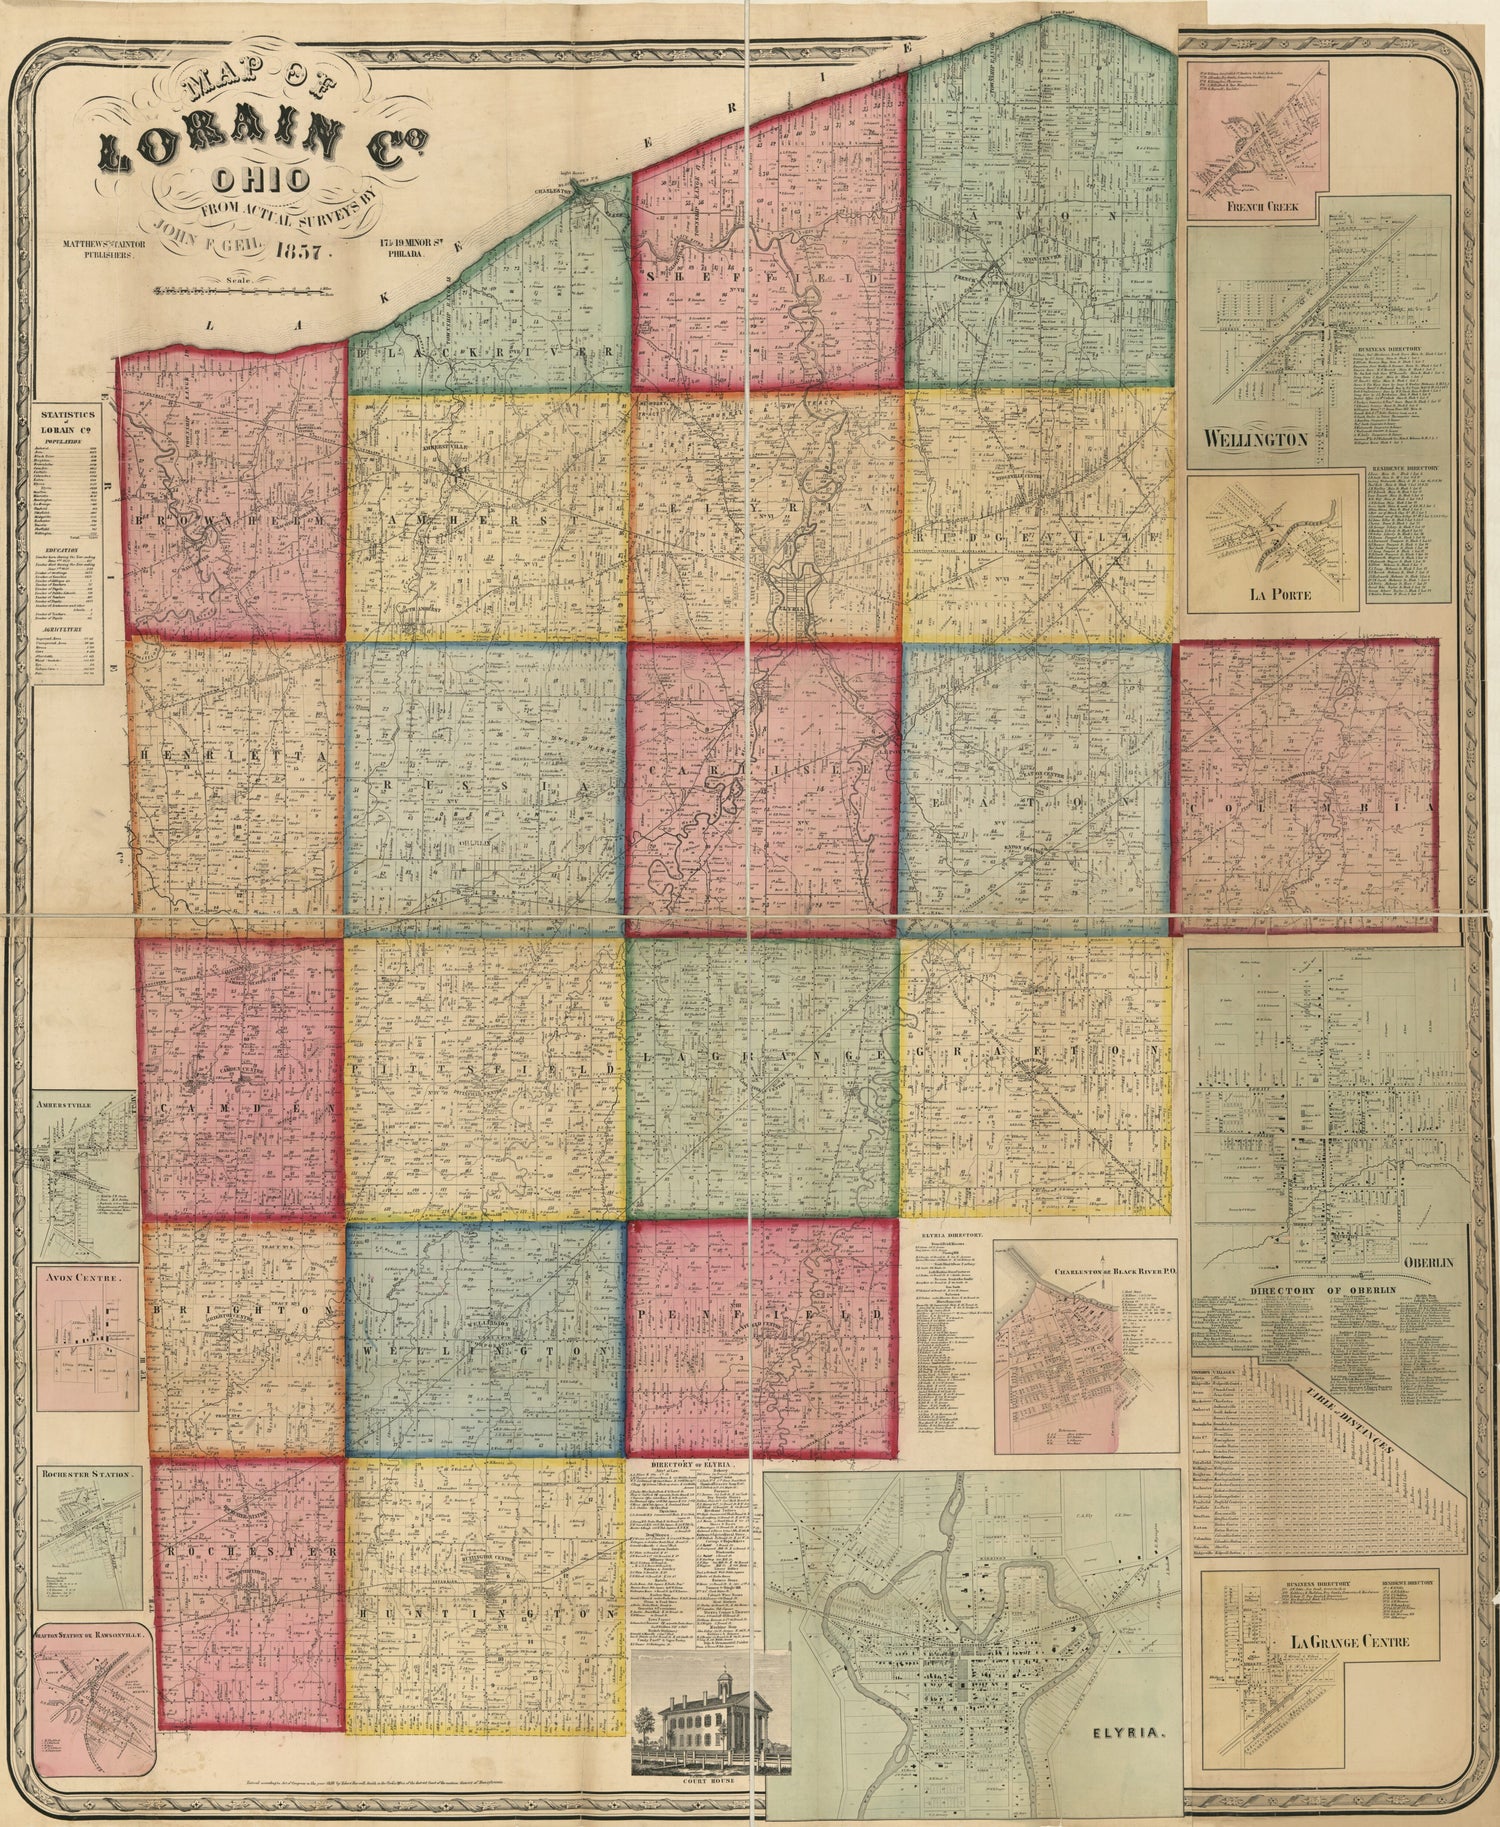 This old map of Map of Lorain Co., Ohio from 1857 was created by John F. Geil in 1857